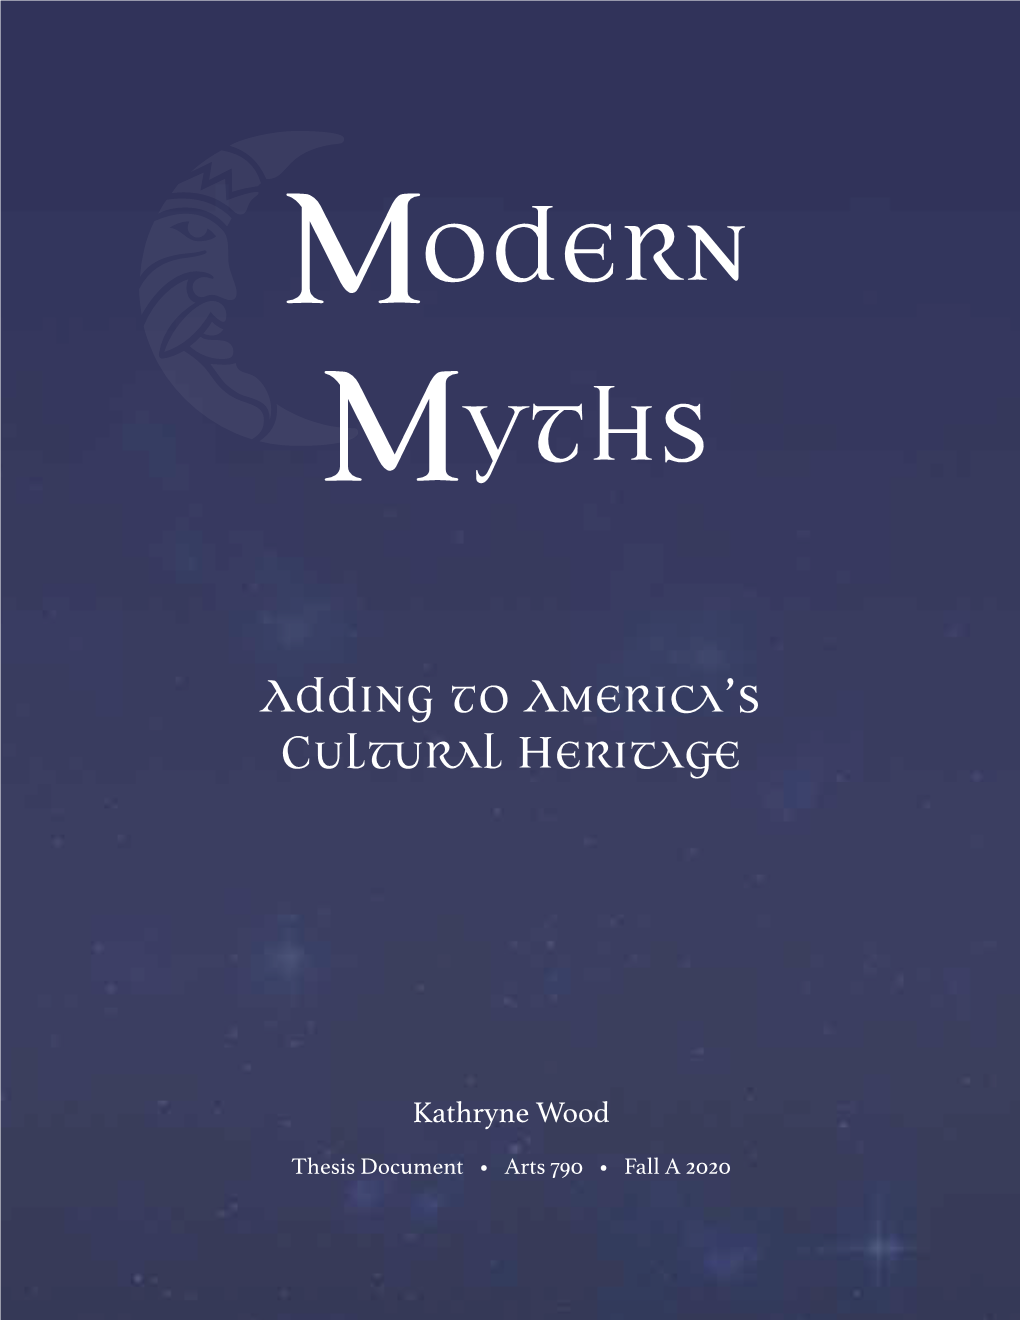 Modern Myths: Adding to America's Cultural Heritage